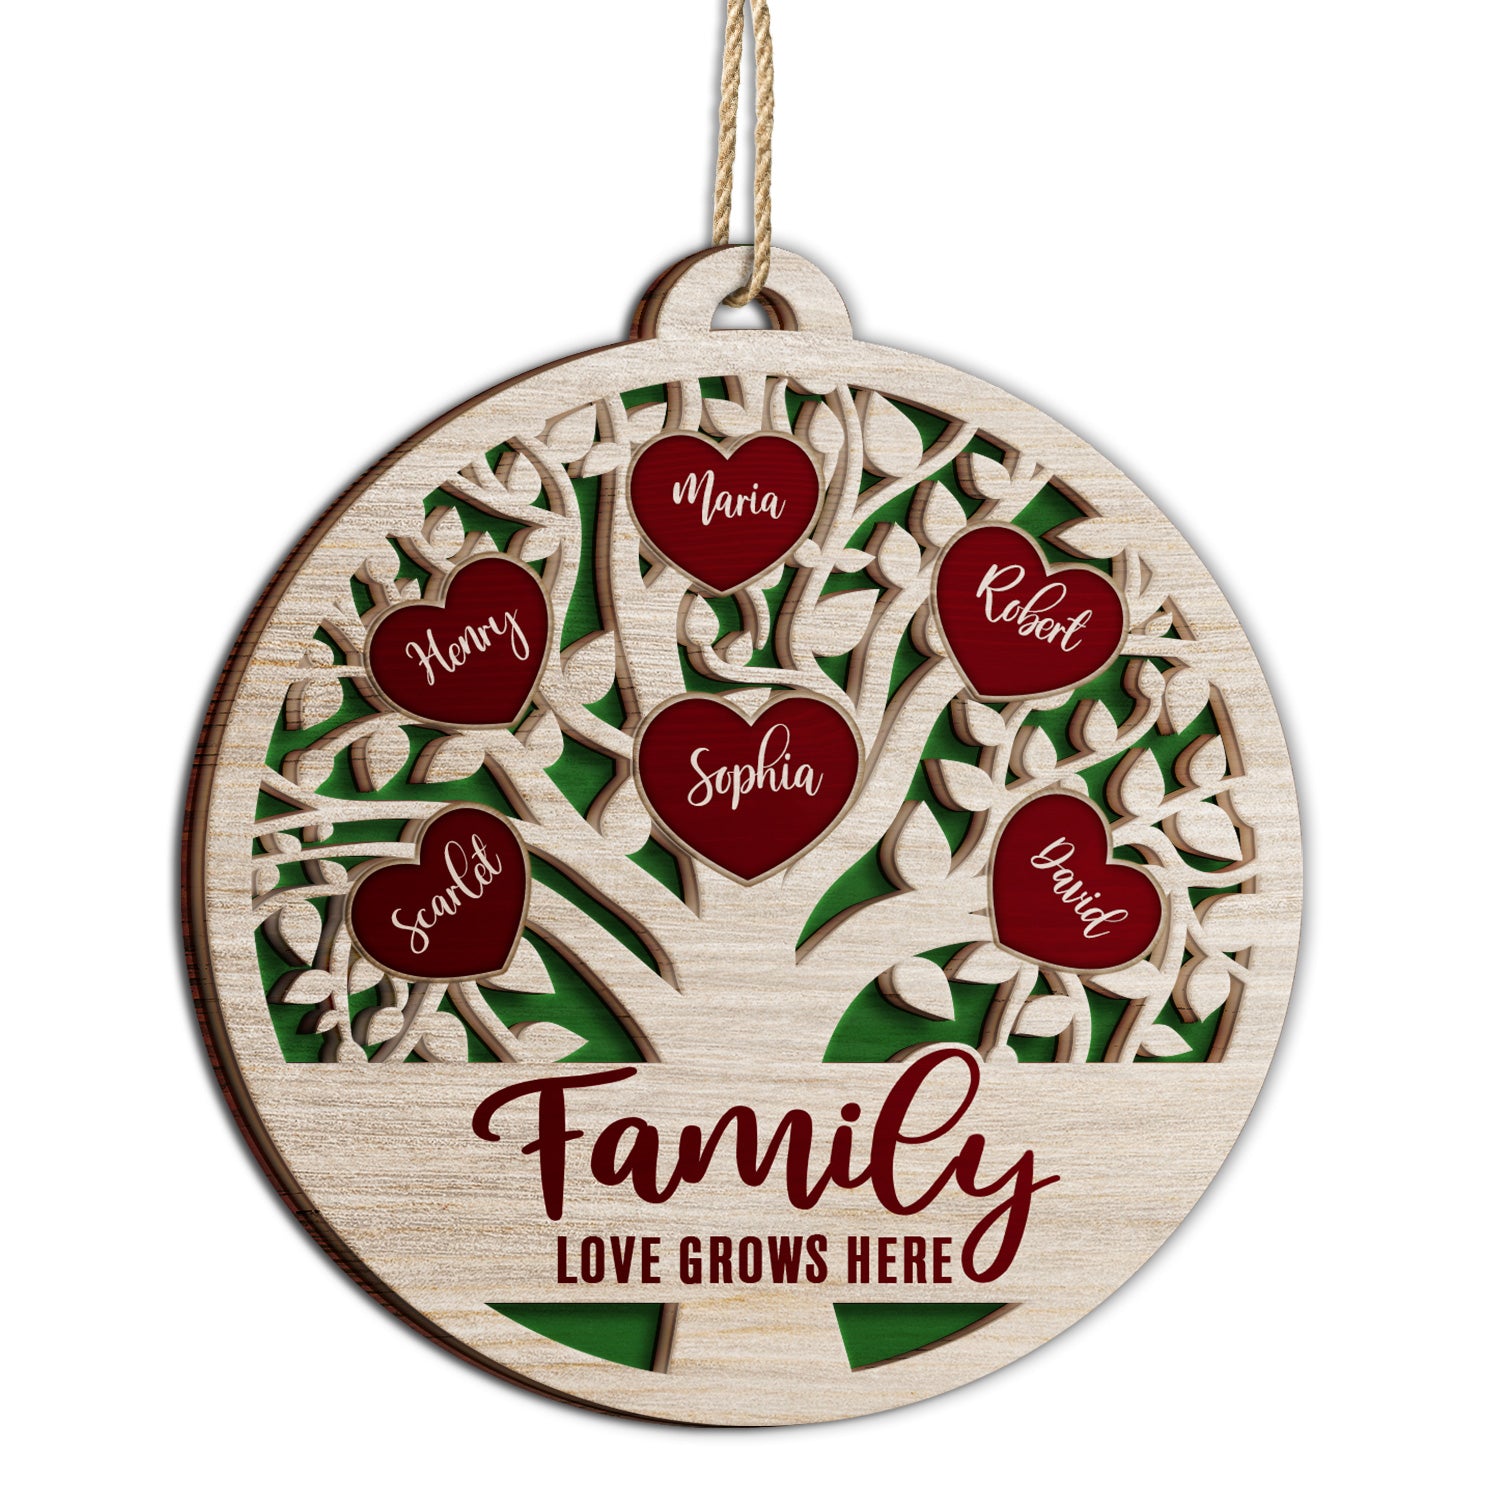 Love Grows Here - Christmas, Birthday, Anniversary, Holiday Gift For Family, Parents, Grandparents - Personalized 2-Layered Wooden Ornament